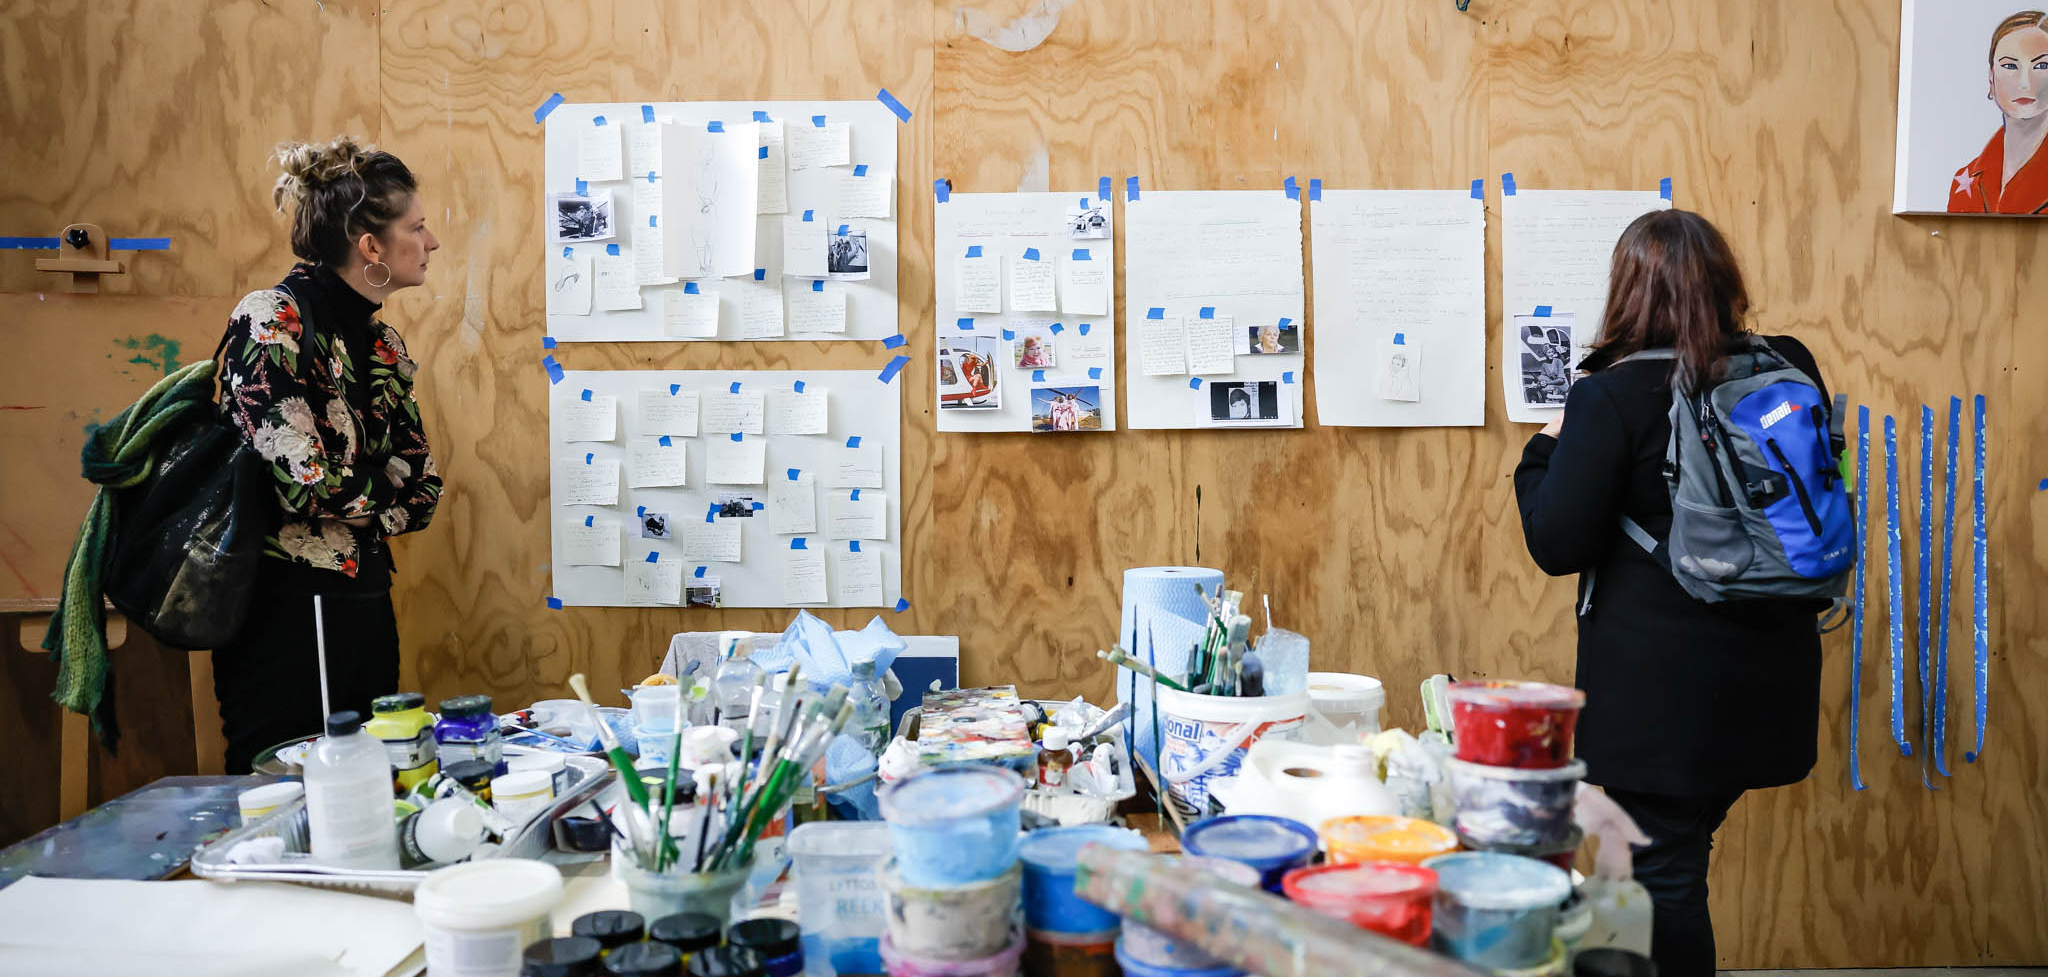 Two people inside an artist studio densely packed with painting materials